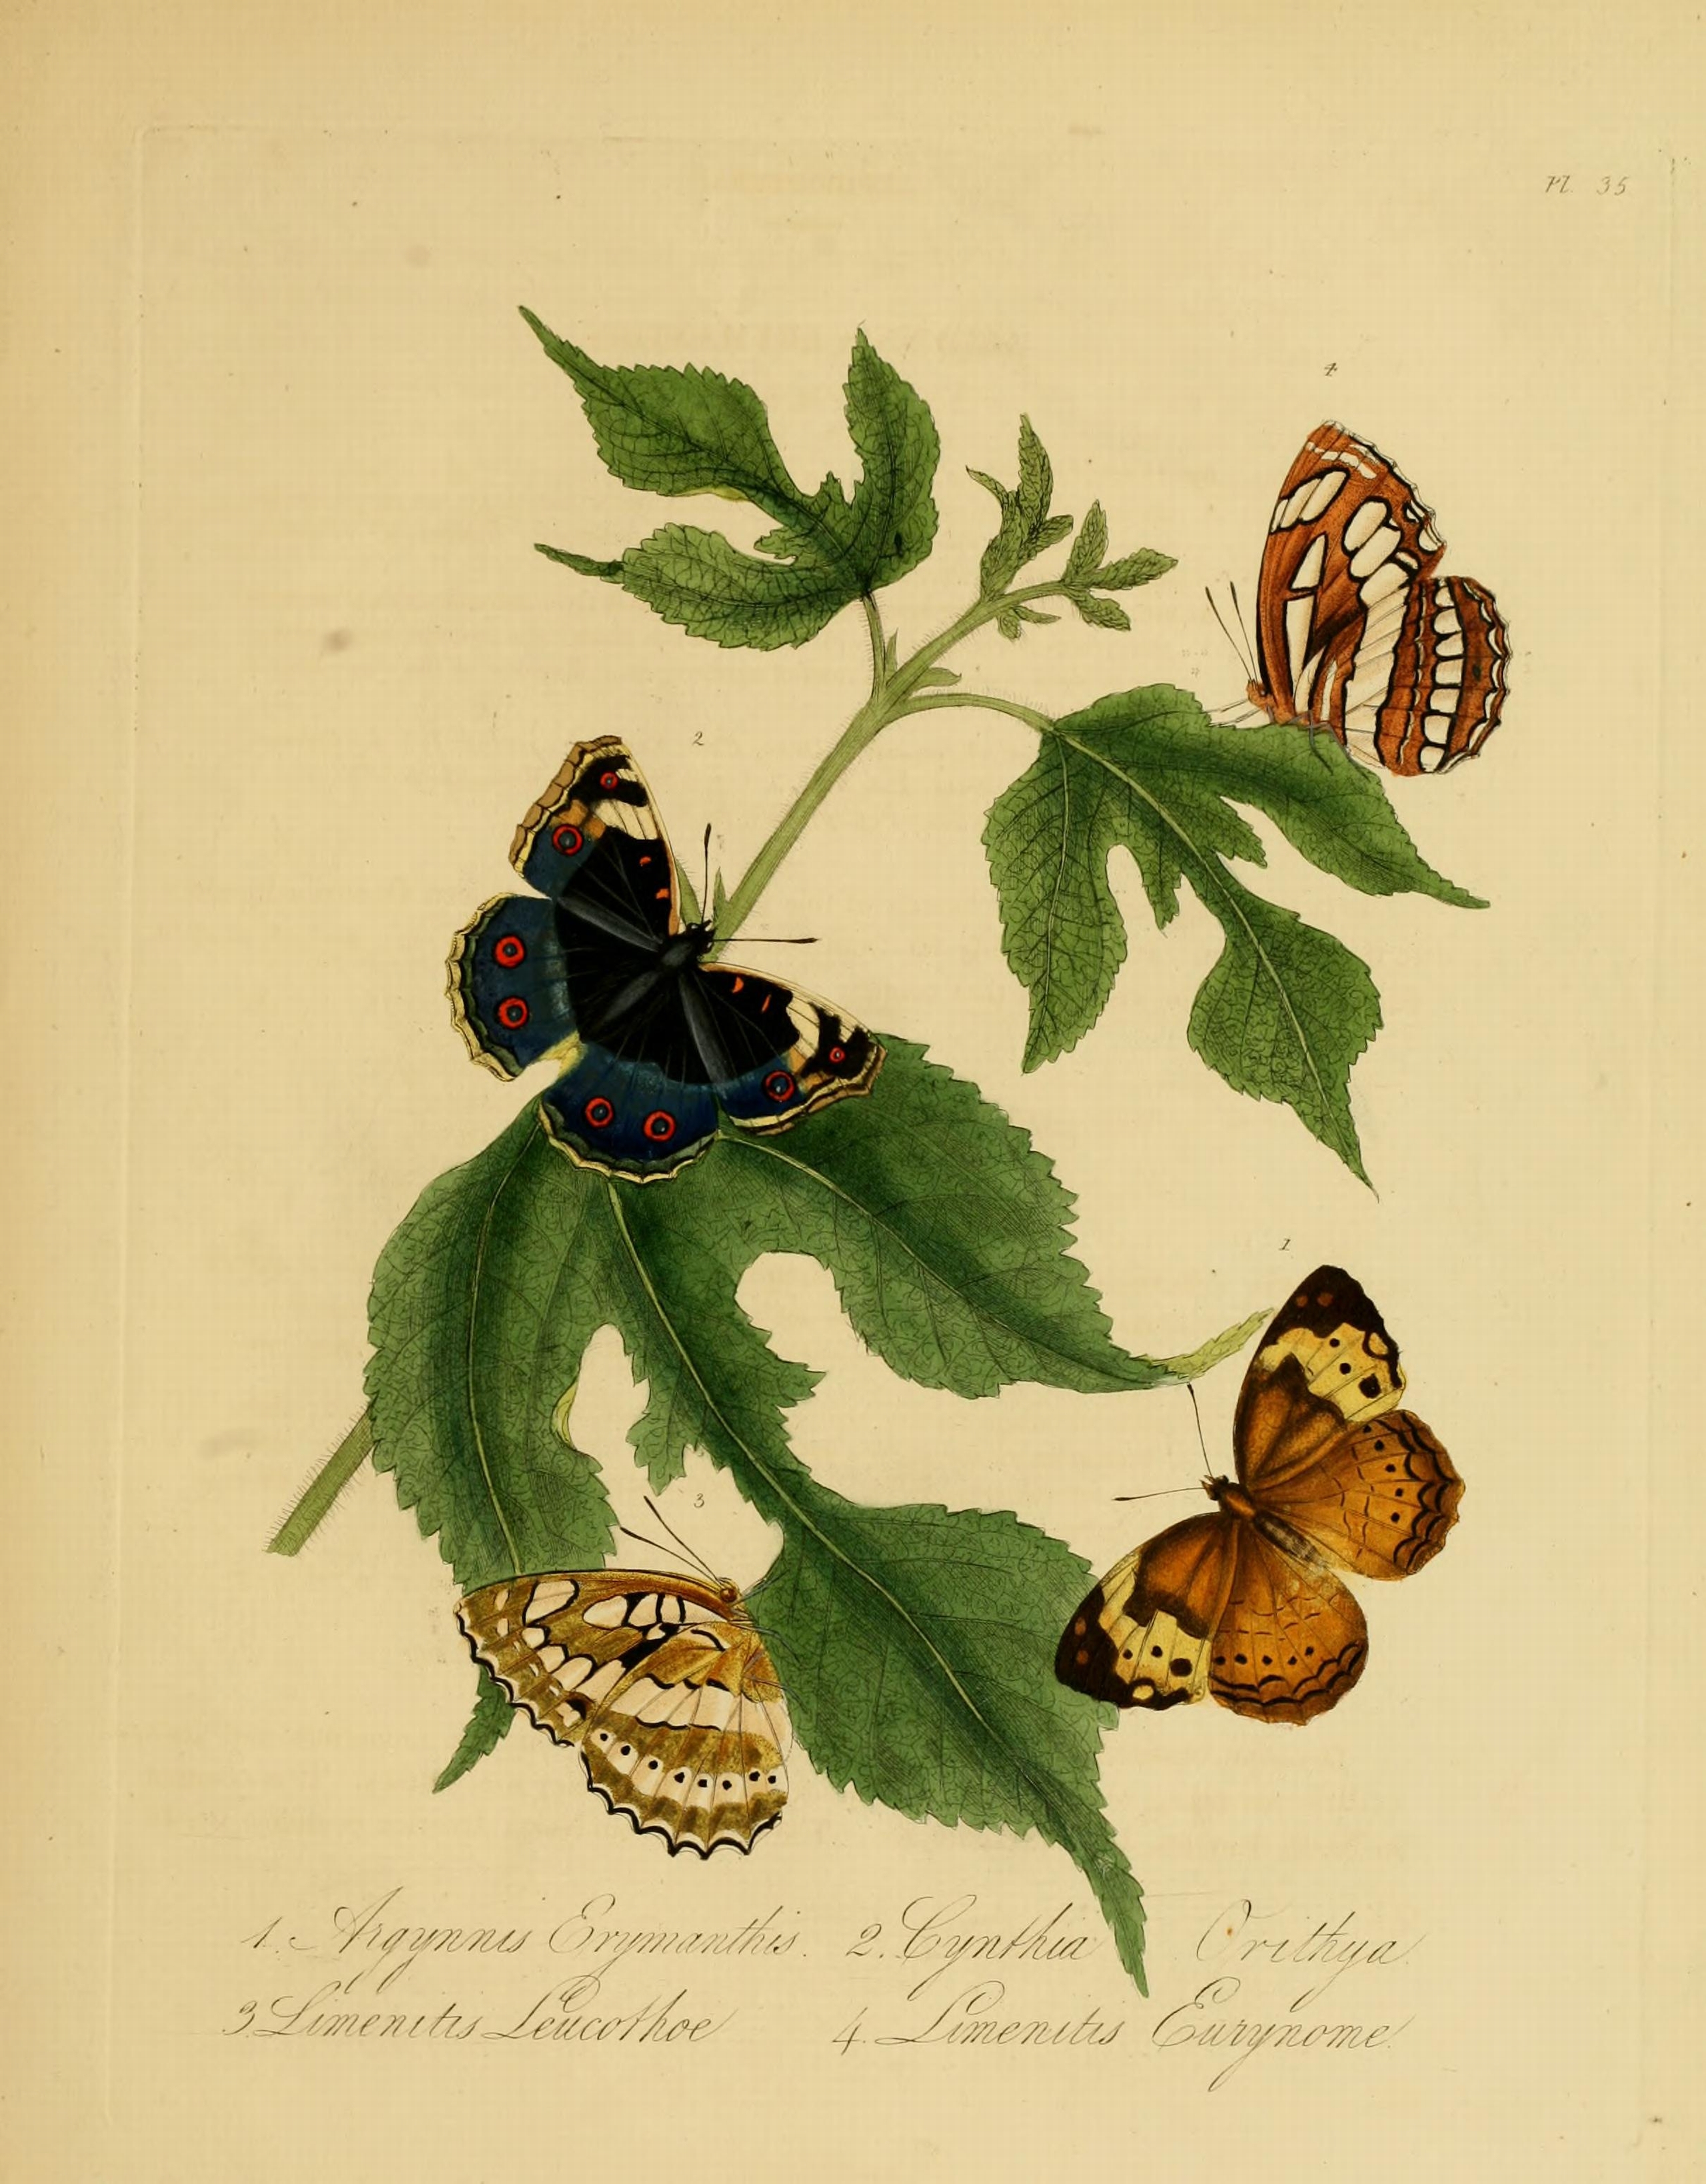 Donovan - Insects of China, 1838 - pl 35